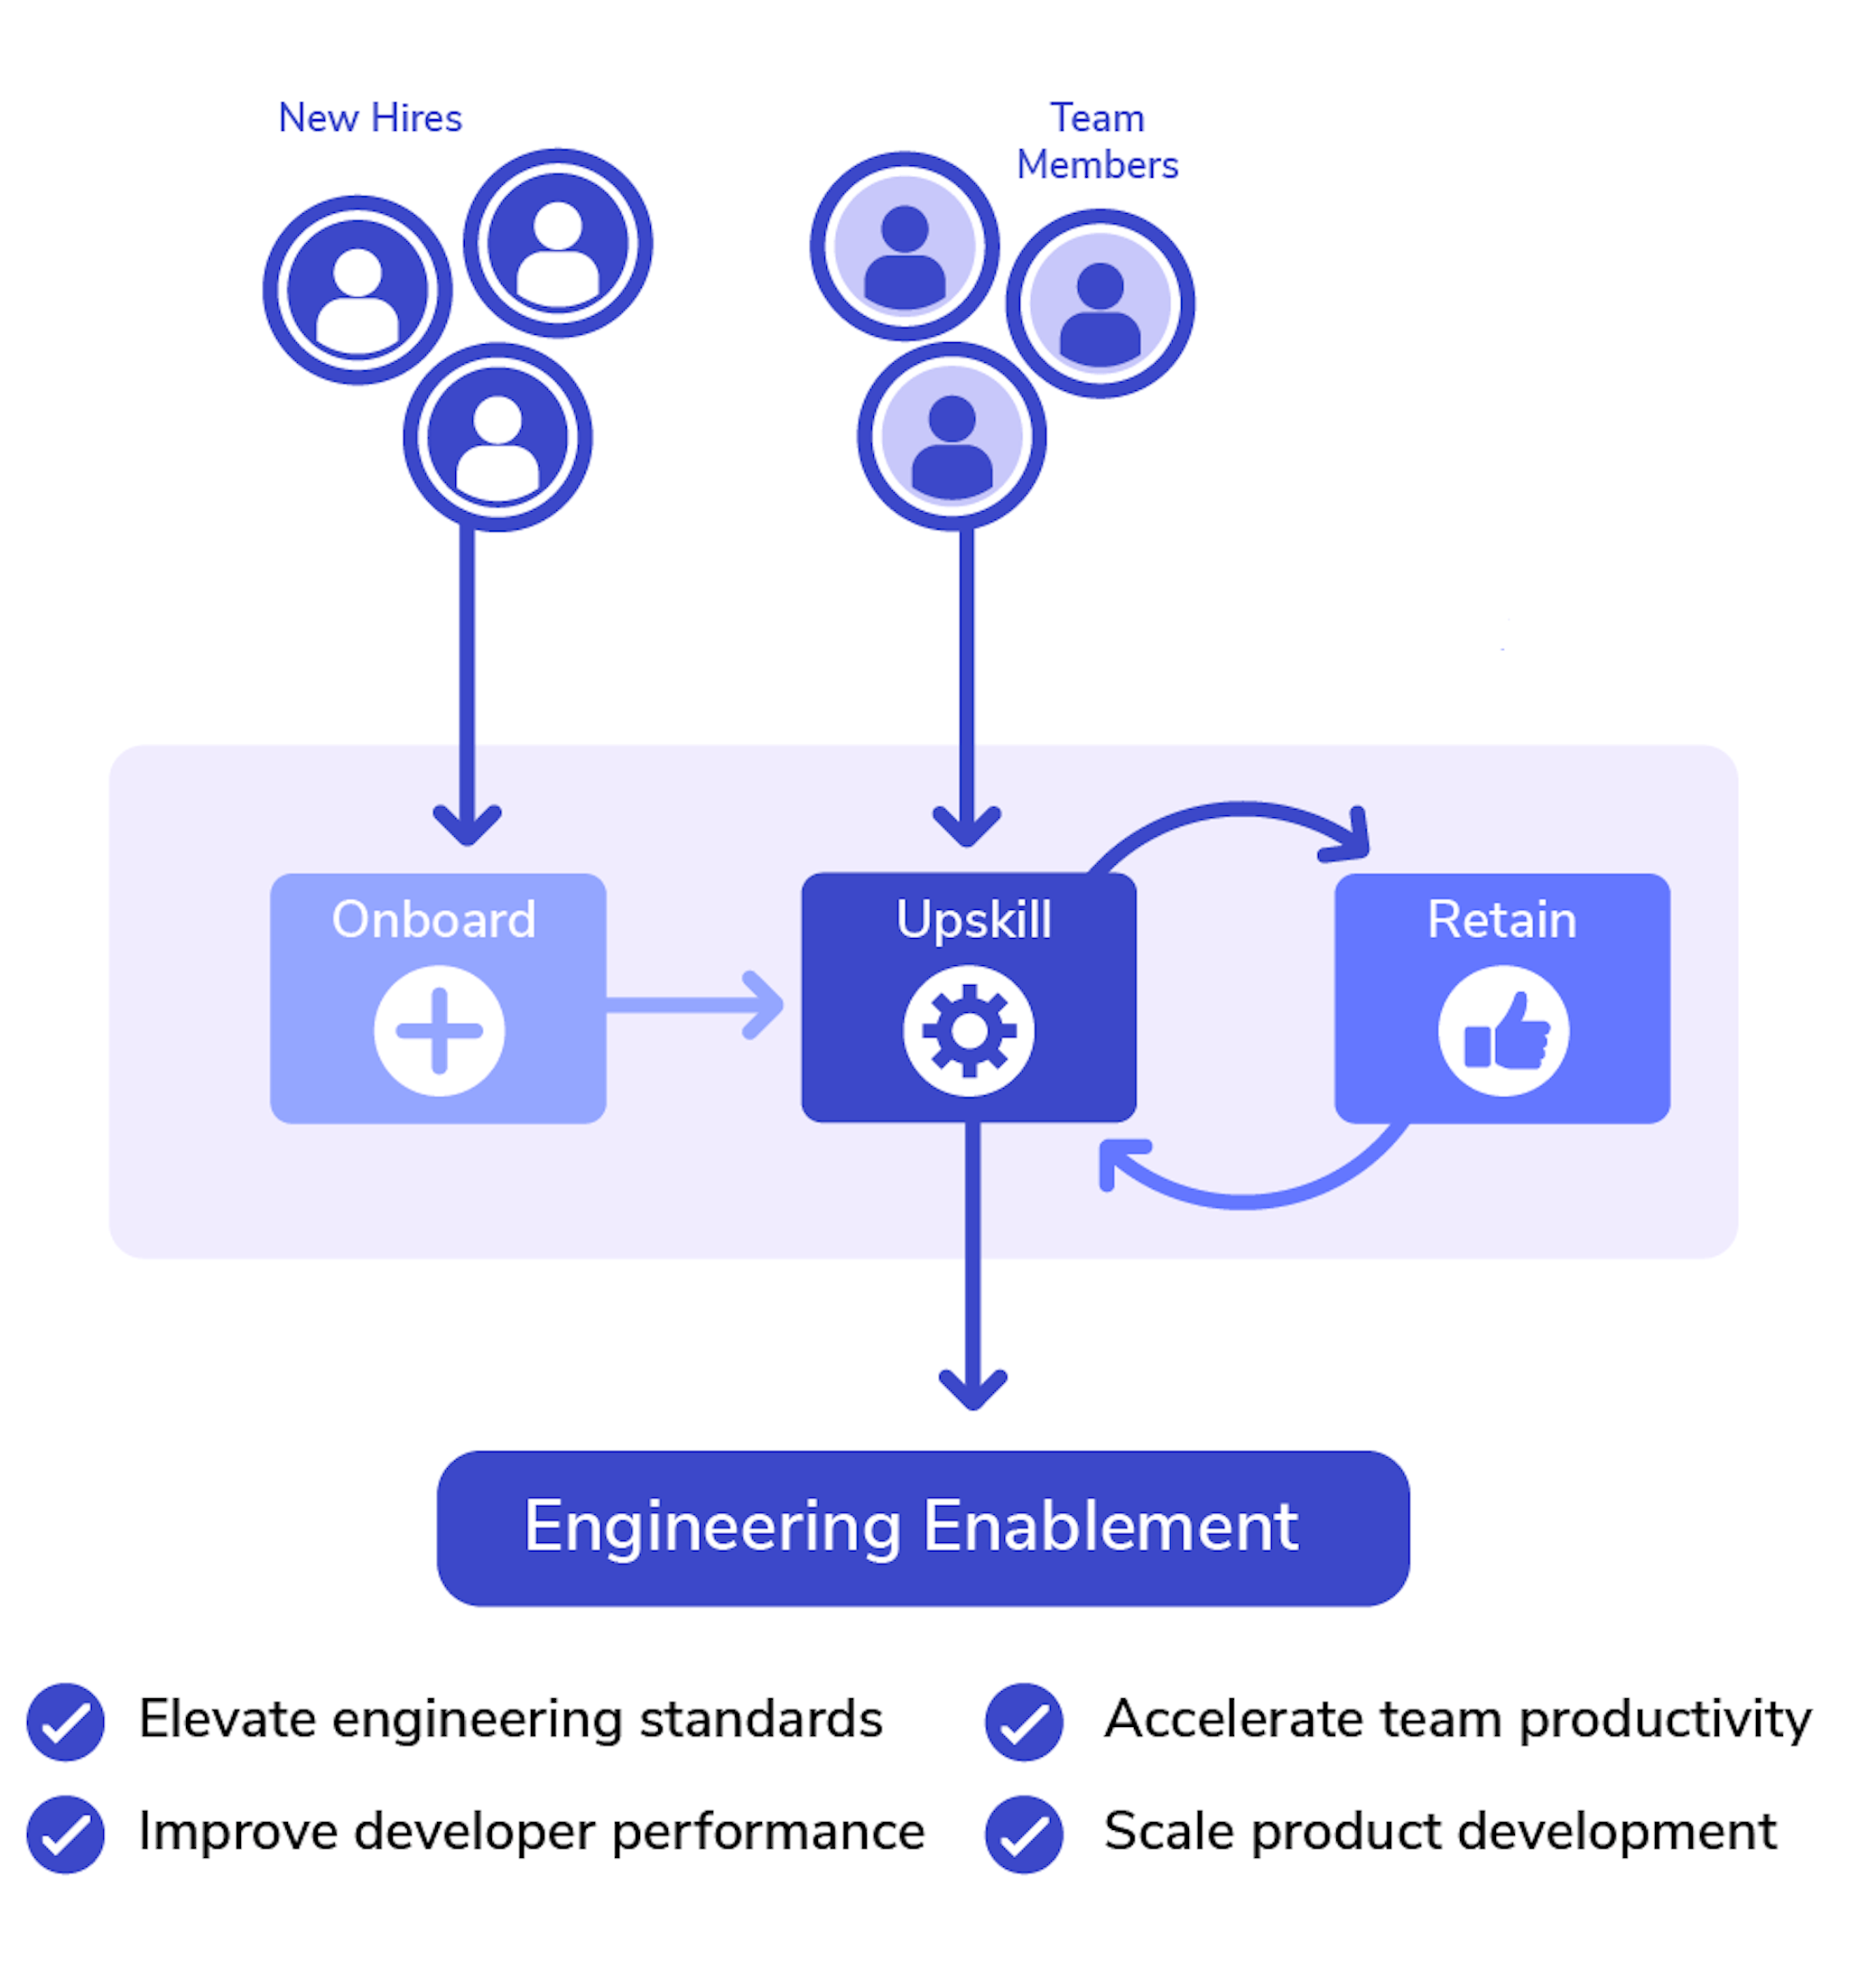 Whether a new hire or an existing team member, engineering enablement starts by giving developers the tools they need to learn and succeed. Better code, better team performance, faster delivery, and achieving scale all follows from learning.